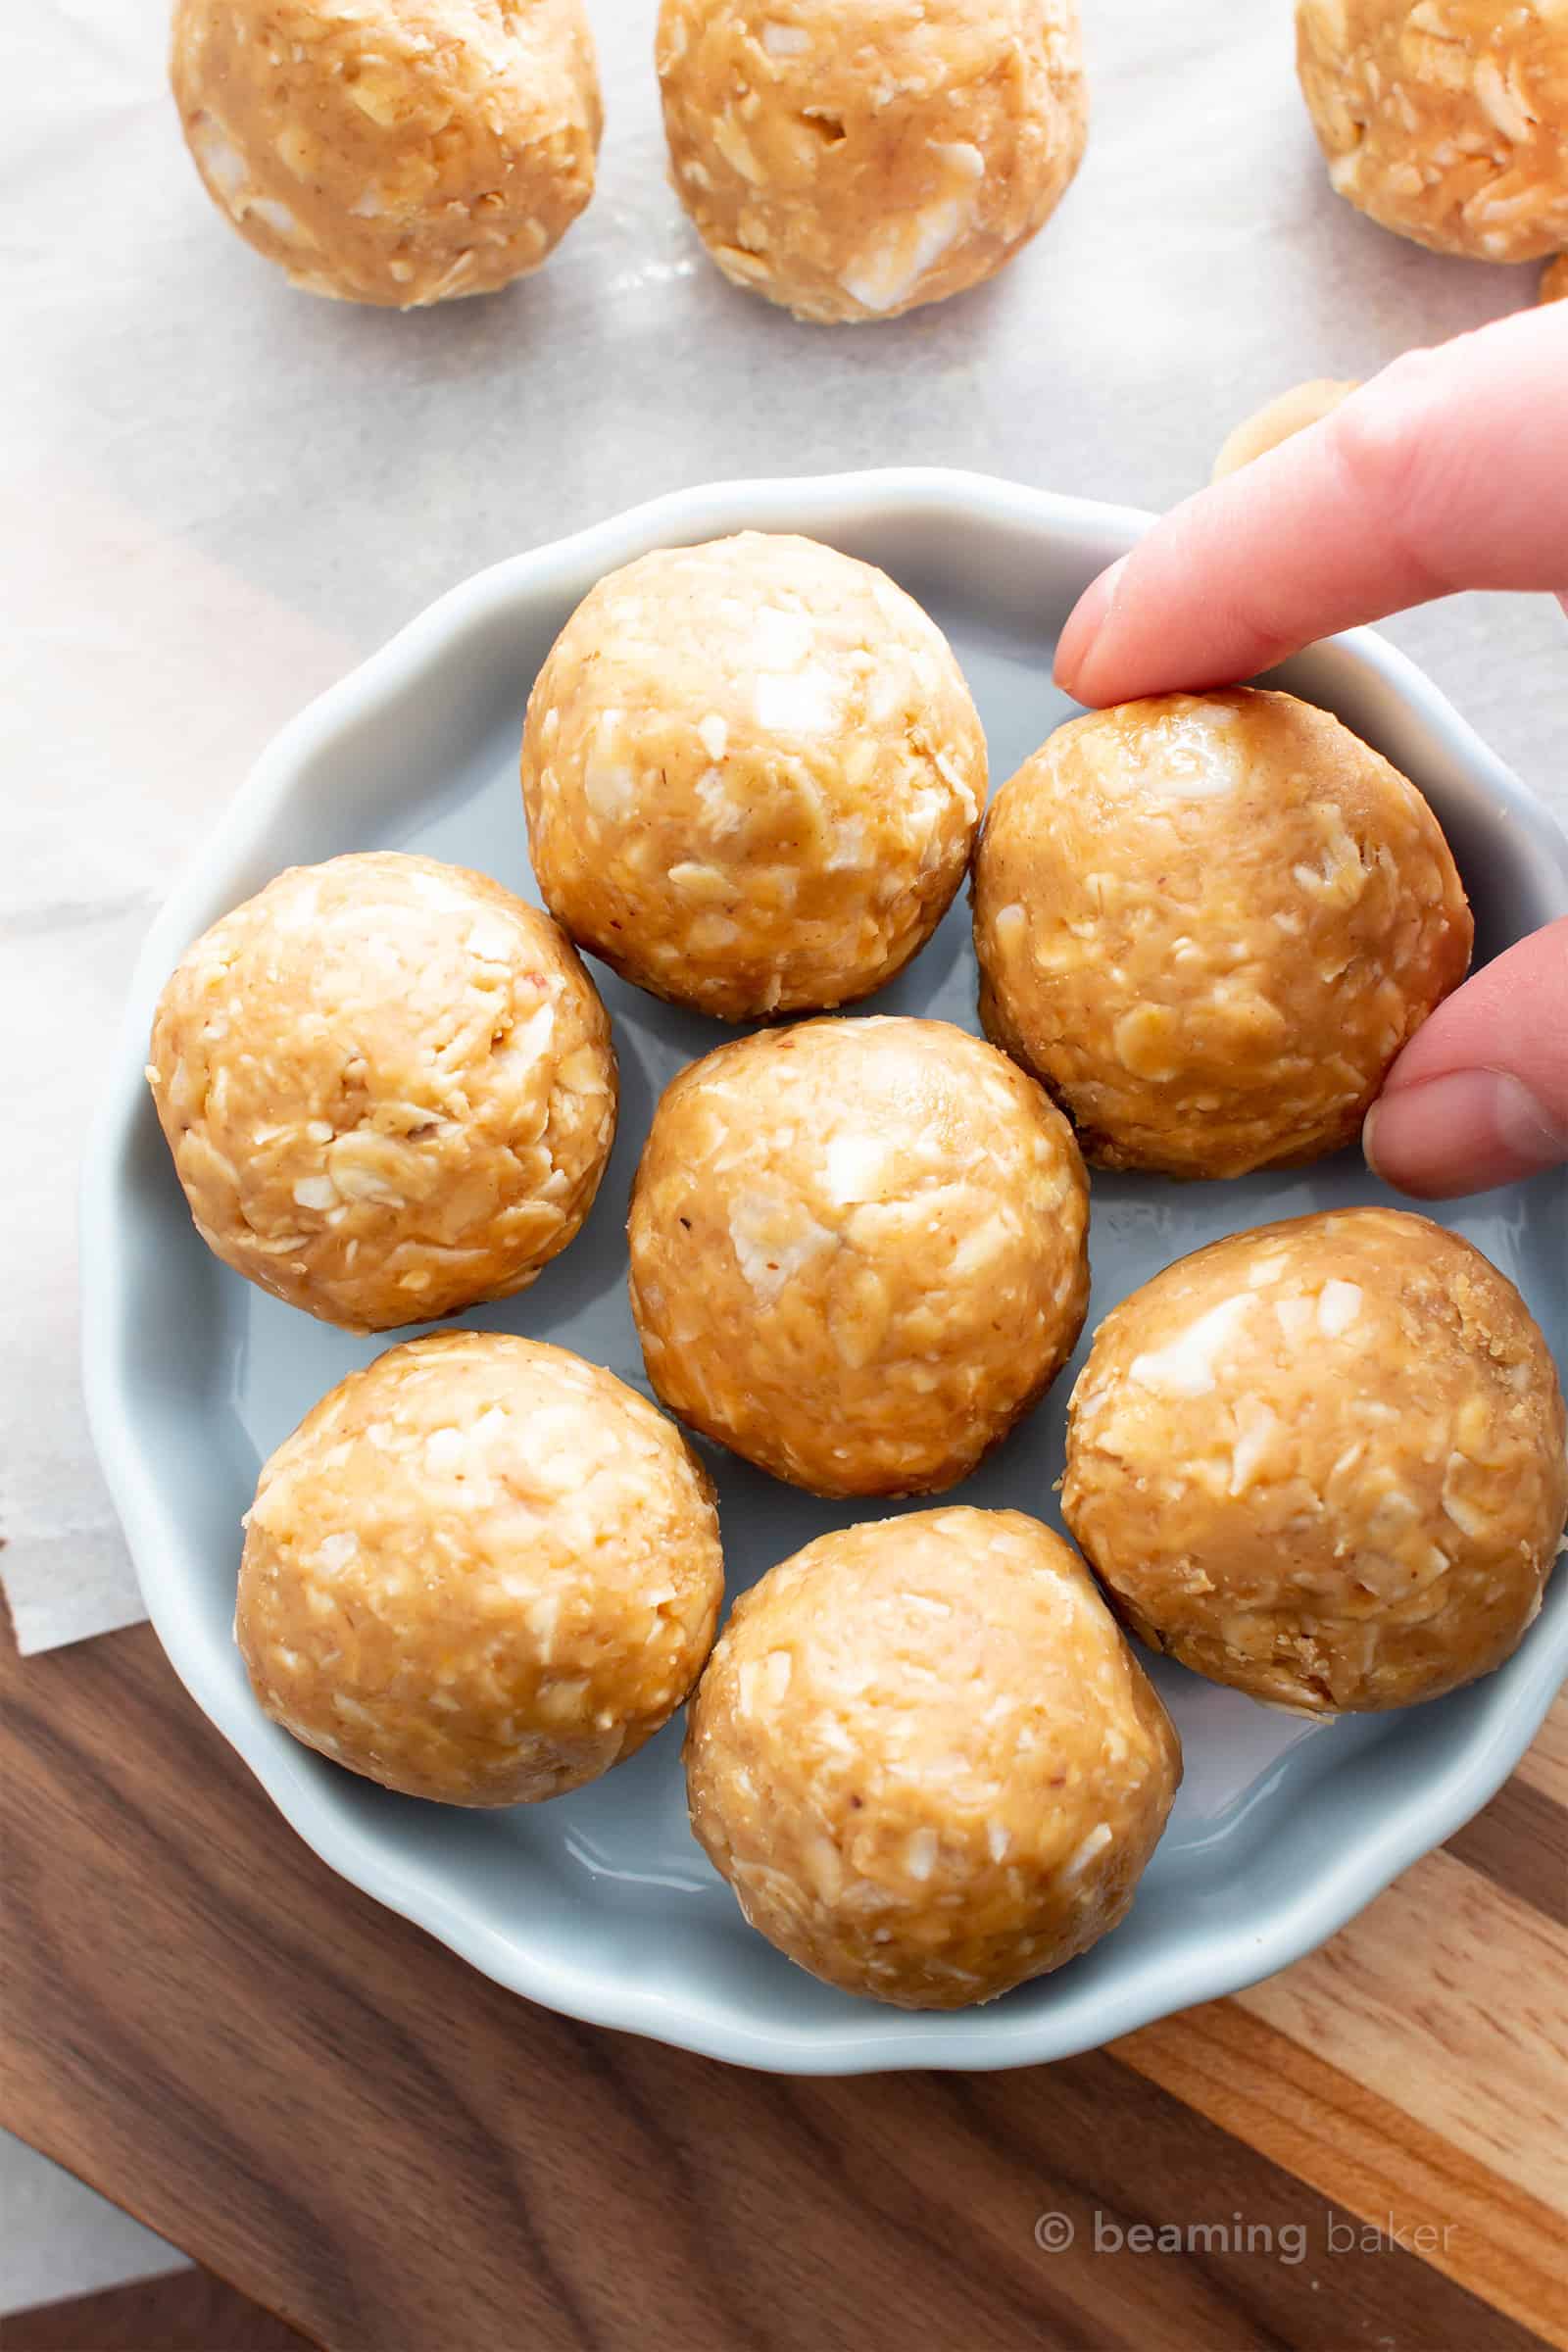 No Bake Peanut Butter Coconut Balls: this healthy energy bites recipe yields chewy, sweet ‘n nutty vegan protein balls with just 6 ingredients! Easy, Gluten Free, Protein Balls! #PeanutButter #Coconut #Healthy #Vegan #GlutenFree | Recipe at BeamingBaker.com